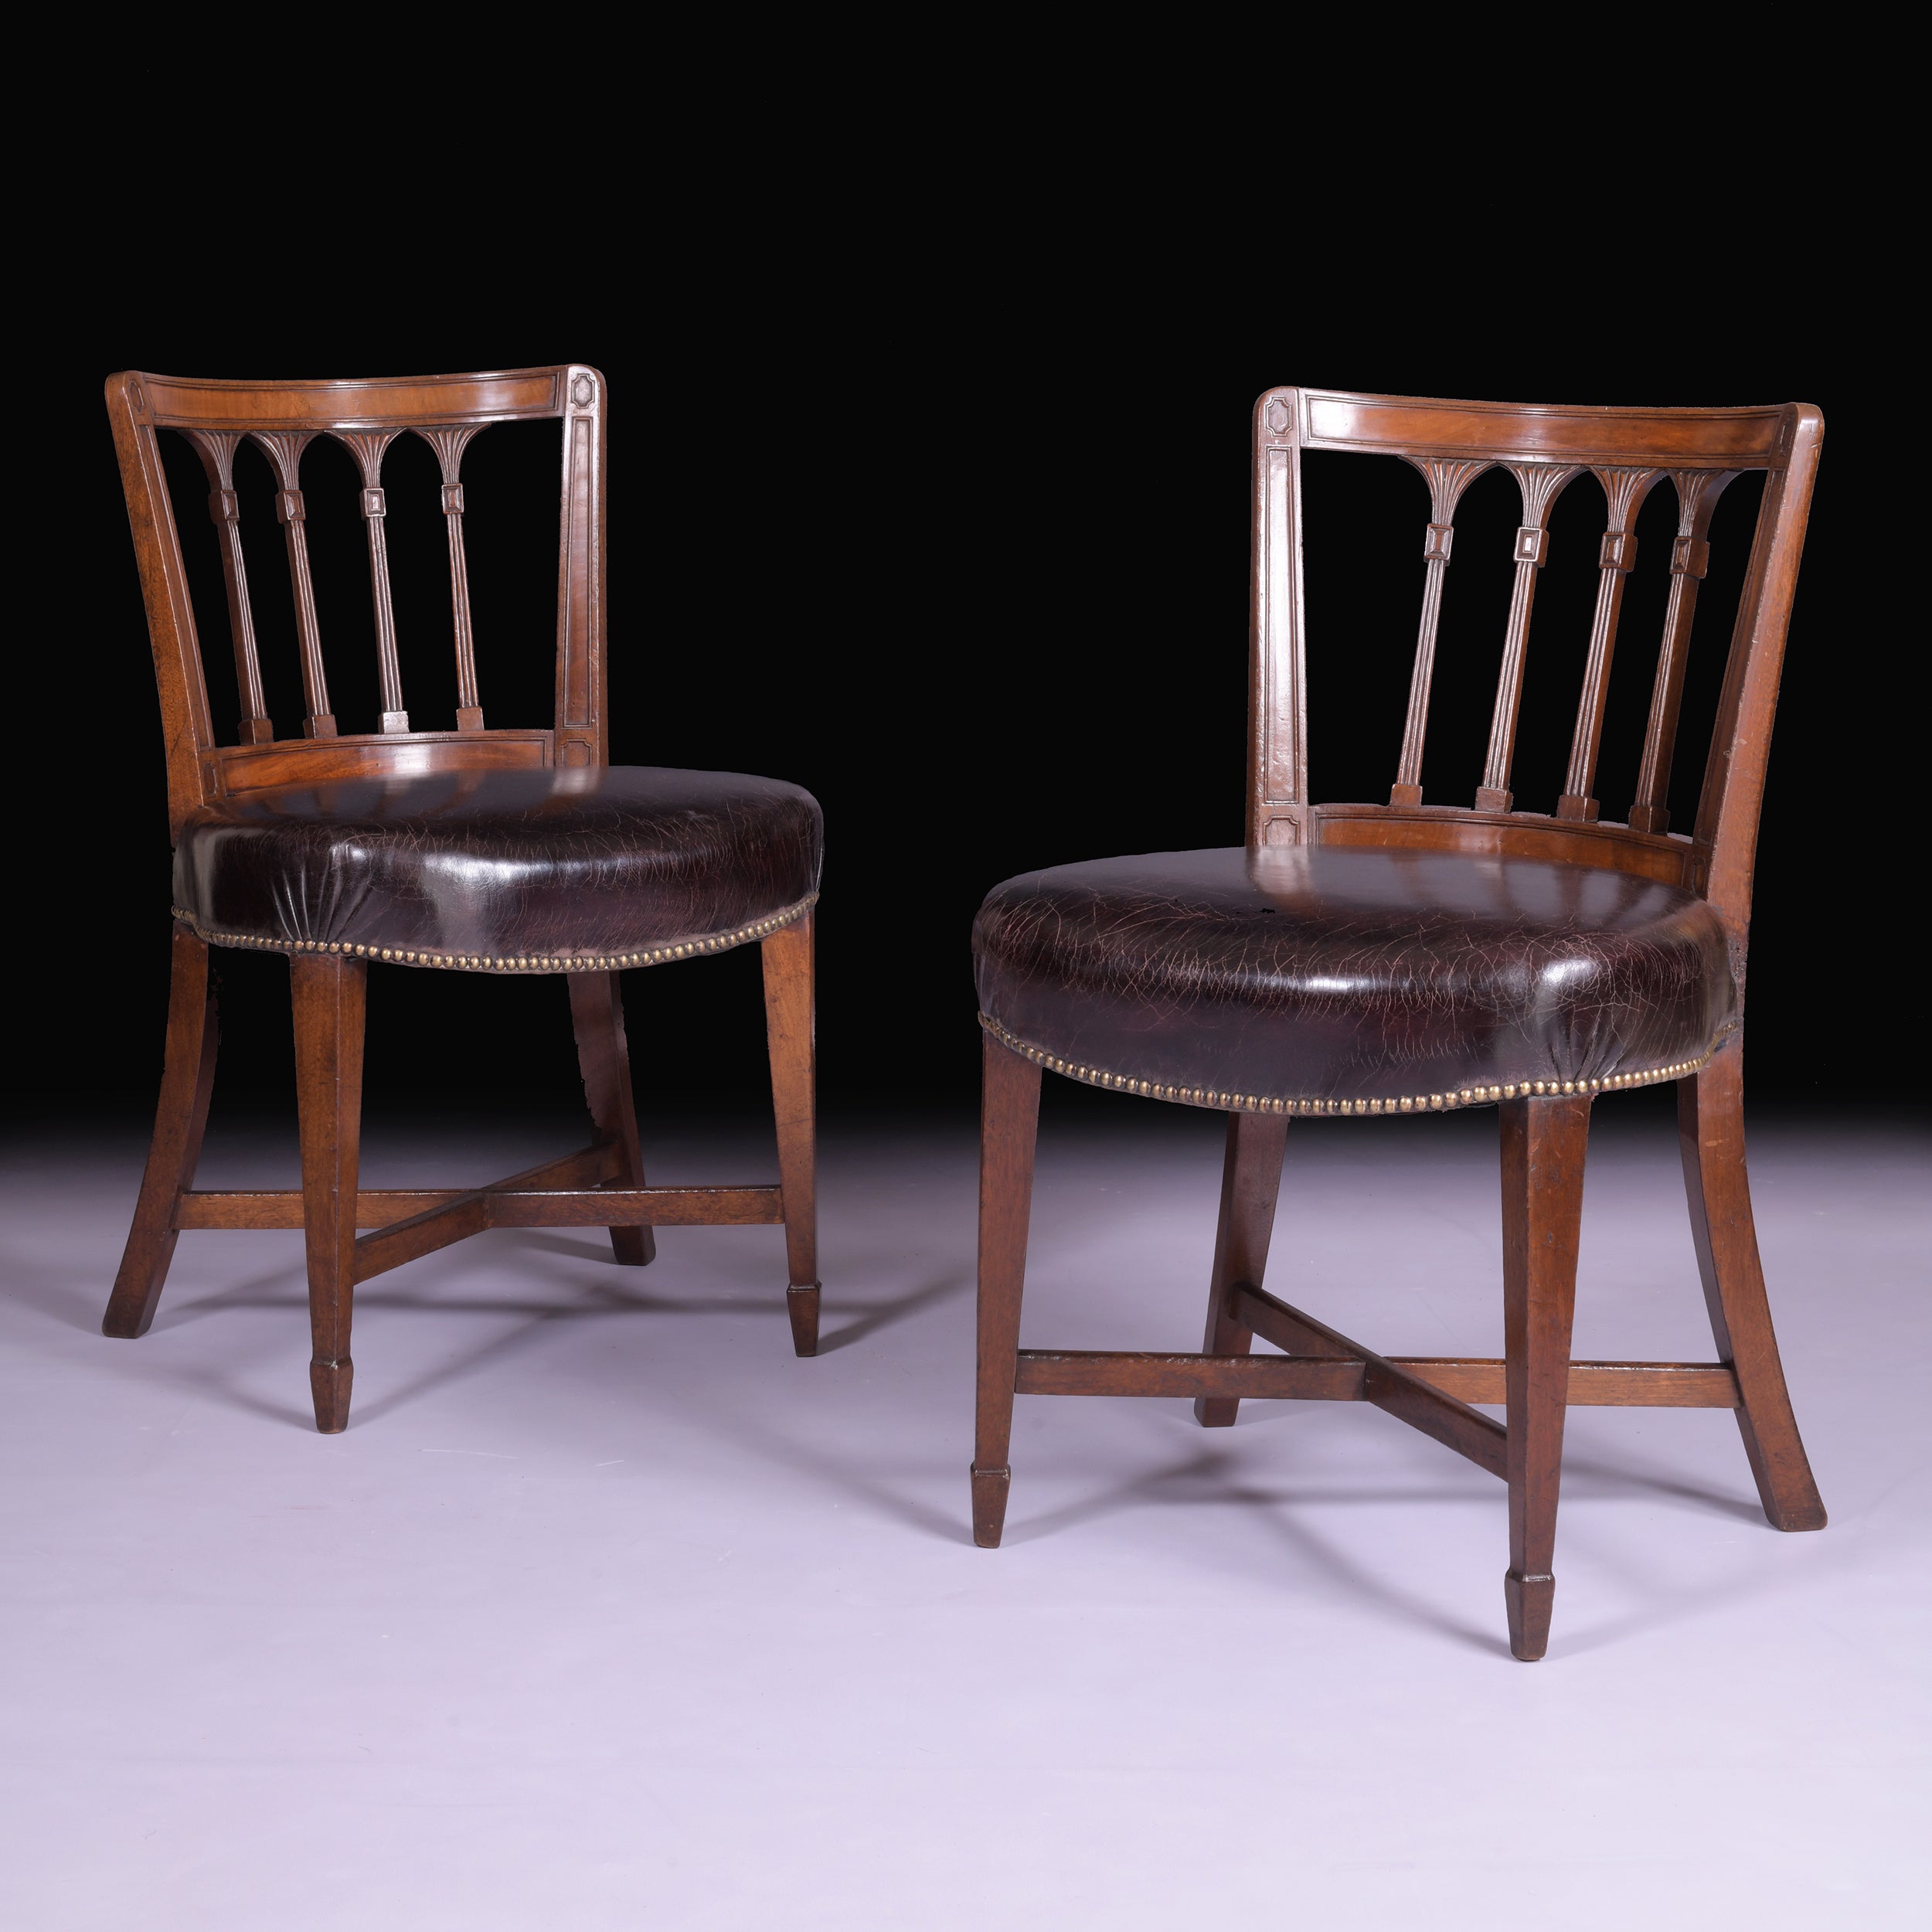 Regency Pair of Early 19th Century Side Chairs Attributed to Gillows of Lancaster For Sale